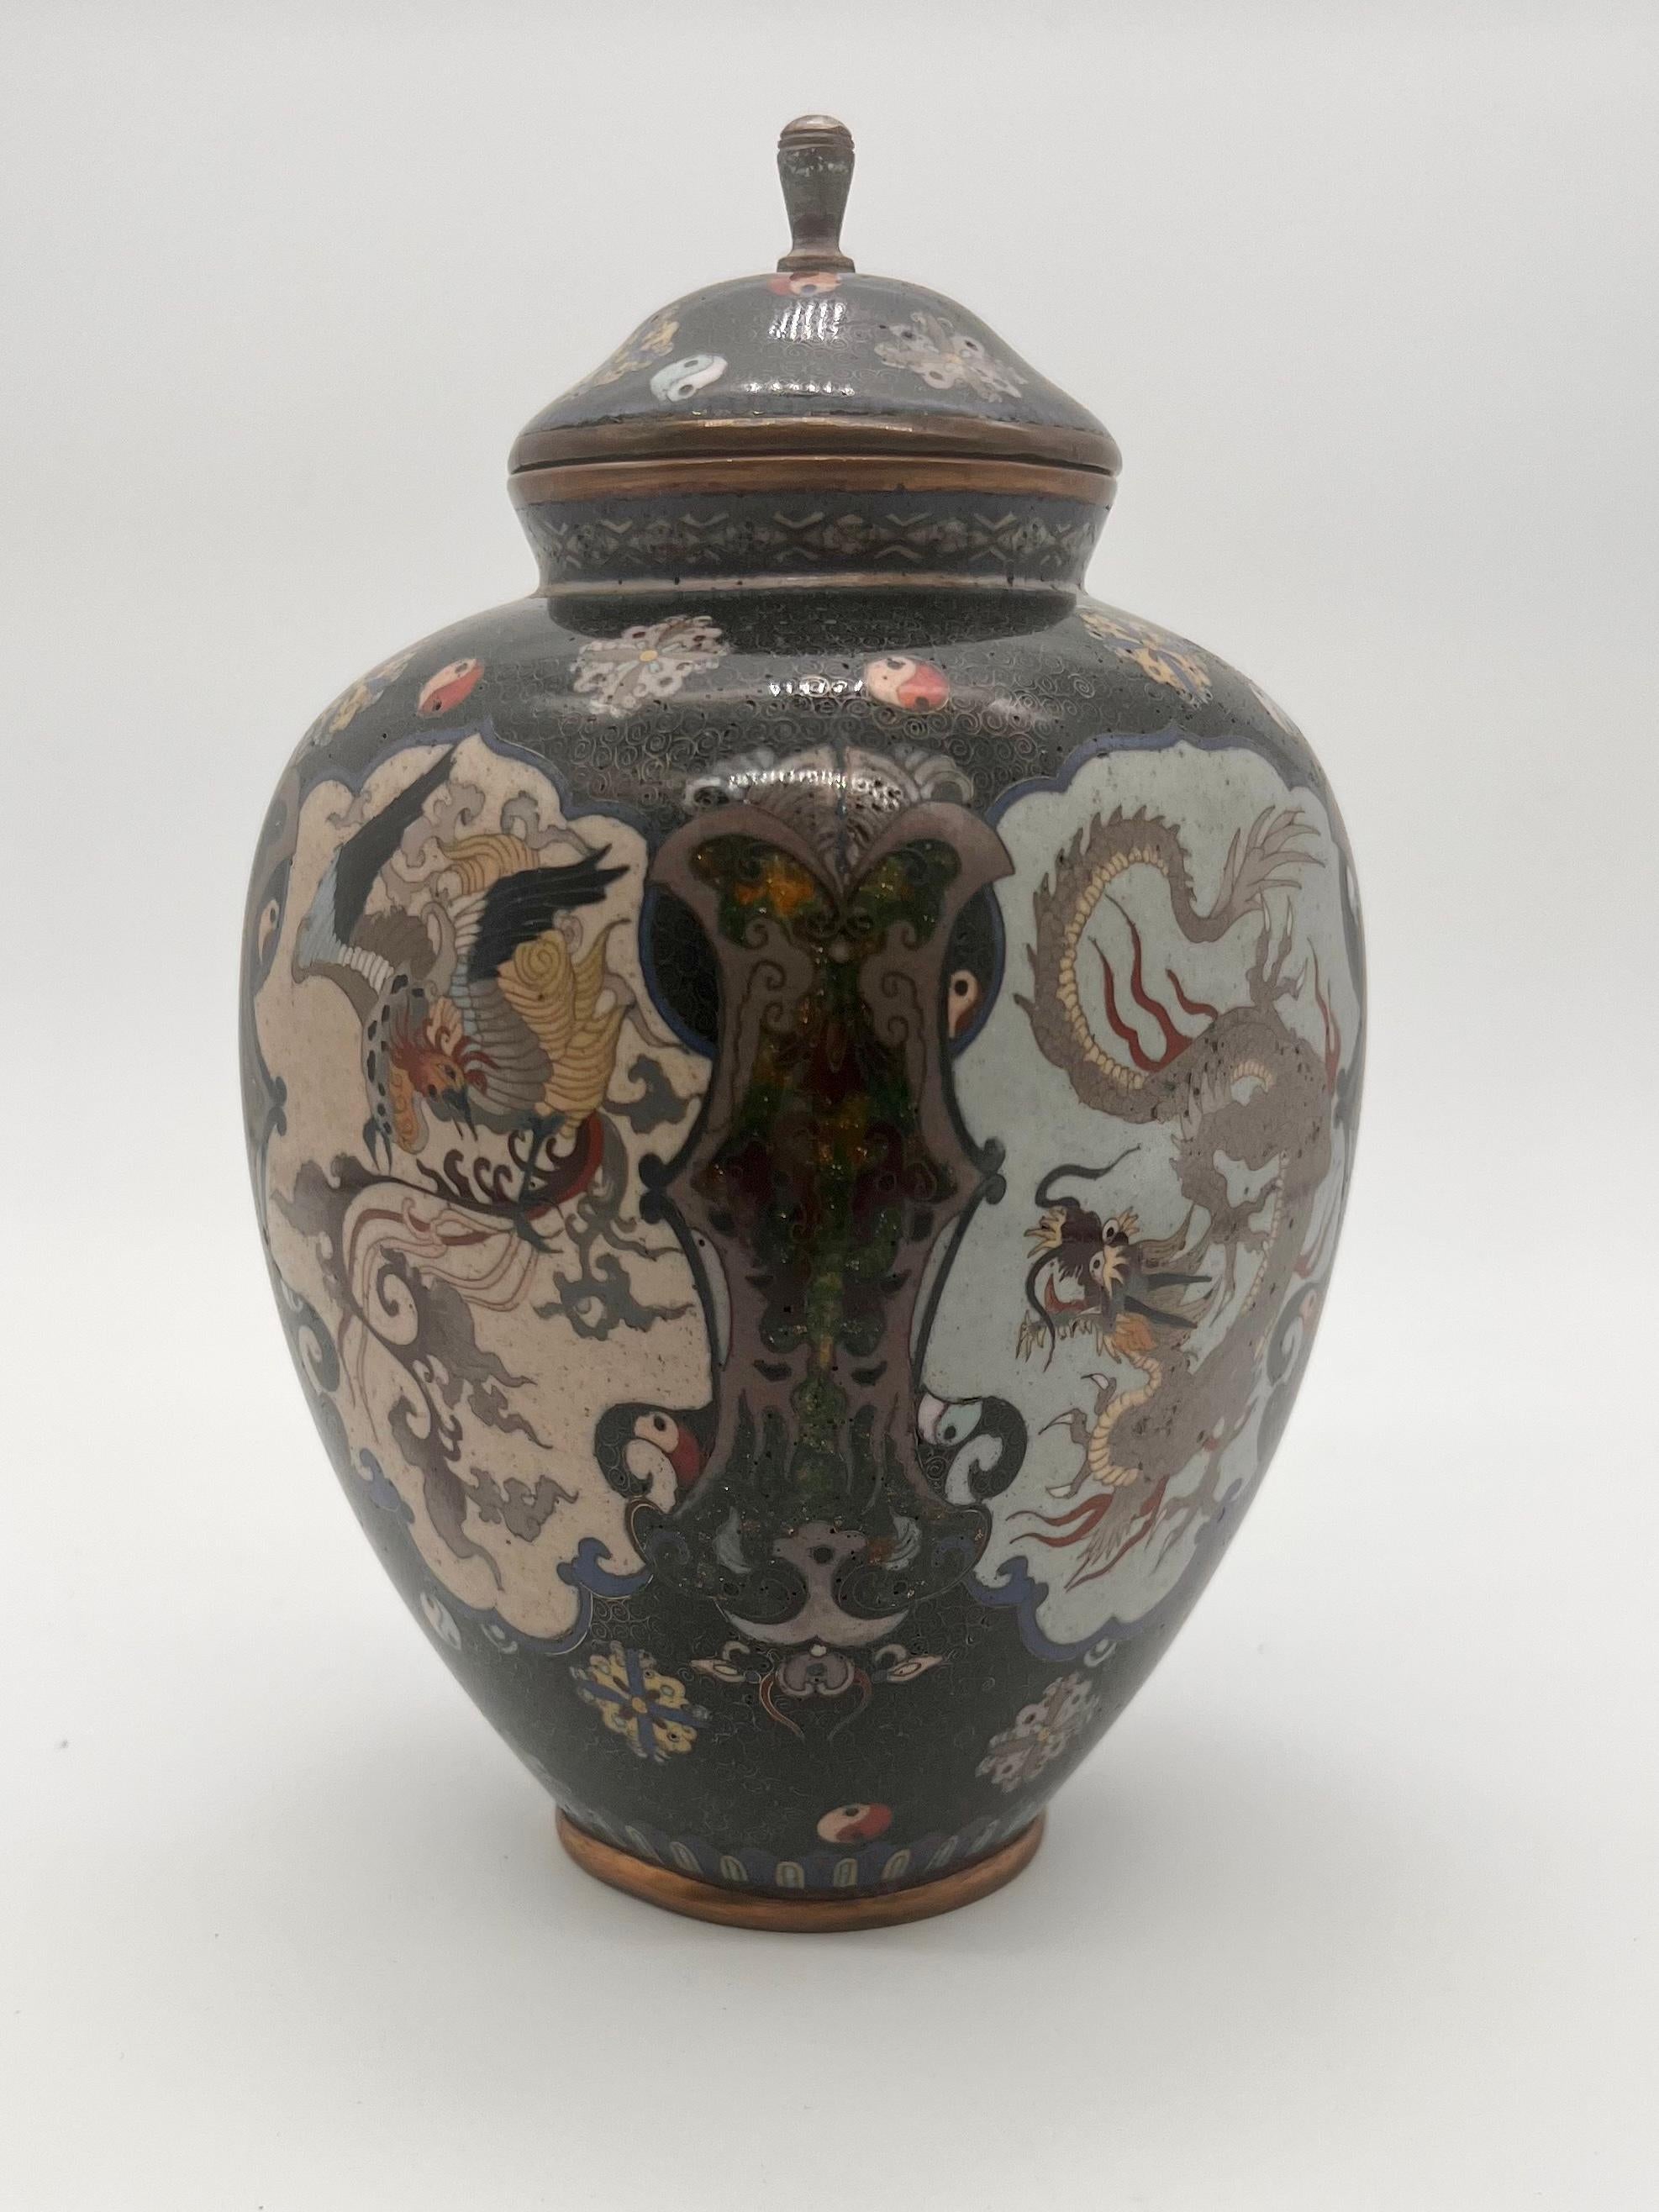 A Exquisite Cloisonne Enamel Vase and cover 

Meiji period -Late 19th C

Exquisite and refined four sided cloisonne vase and cover made in gold and silver wire with dragons and phoenix birds in different poses. The surrounding areas with flowering